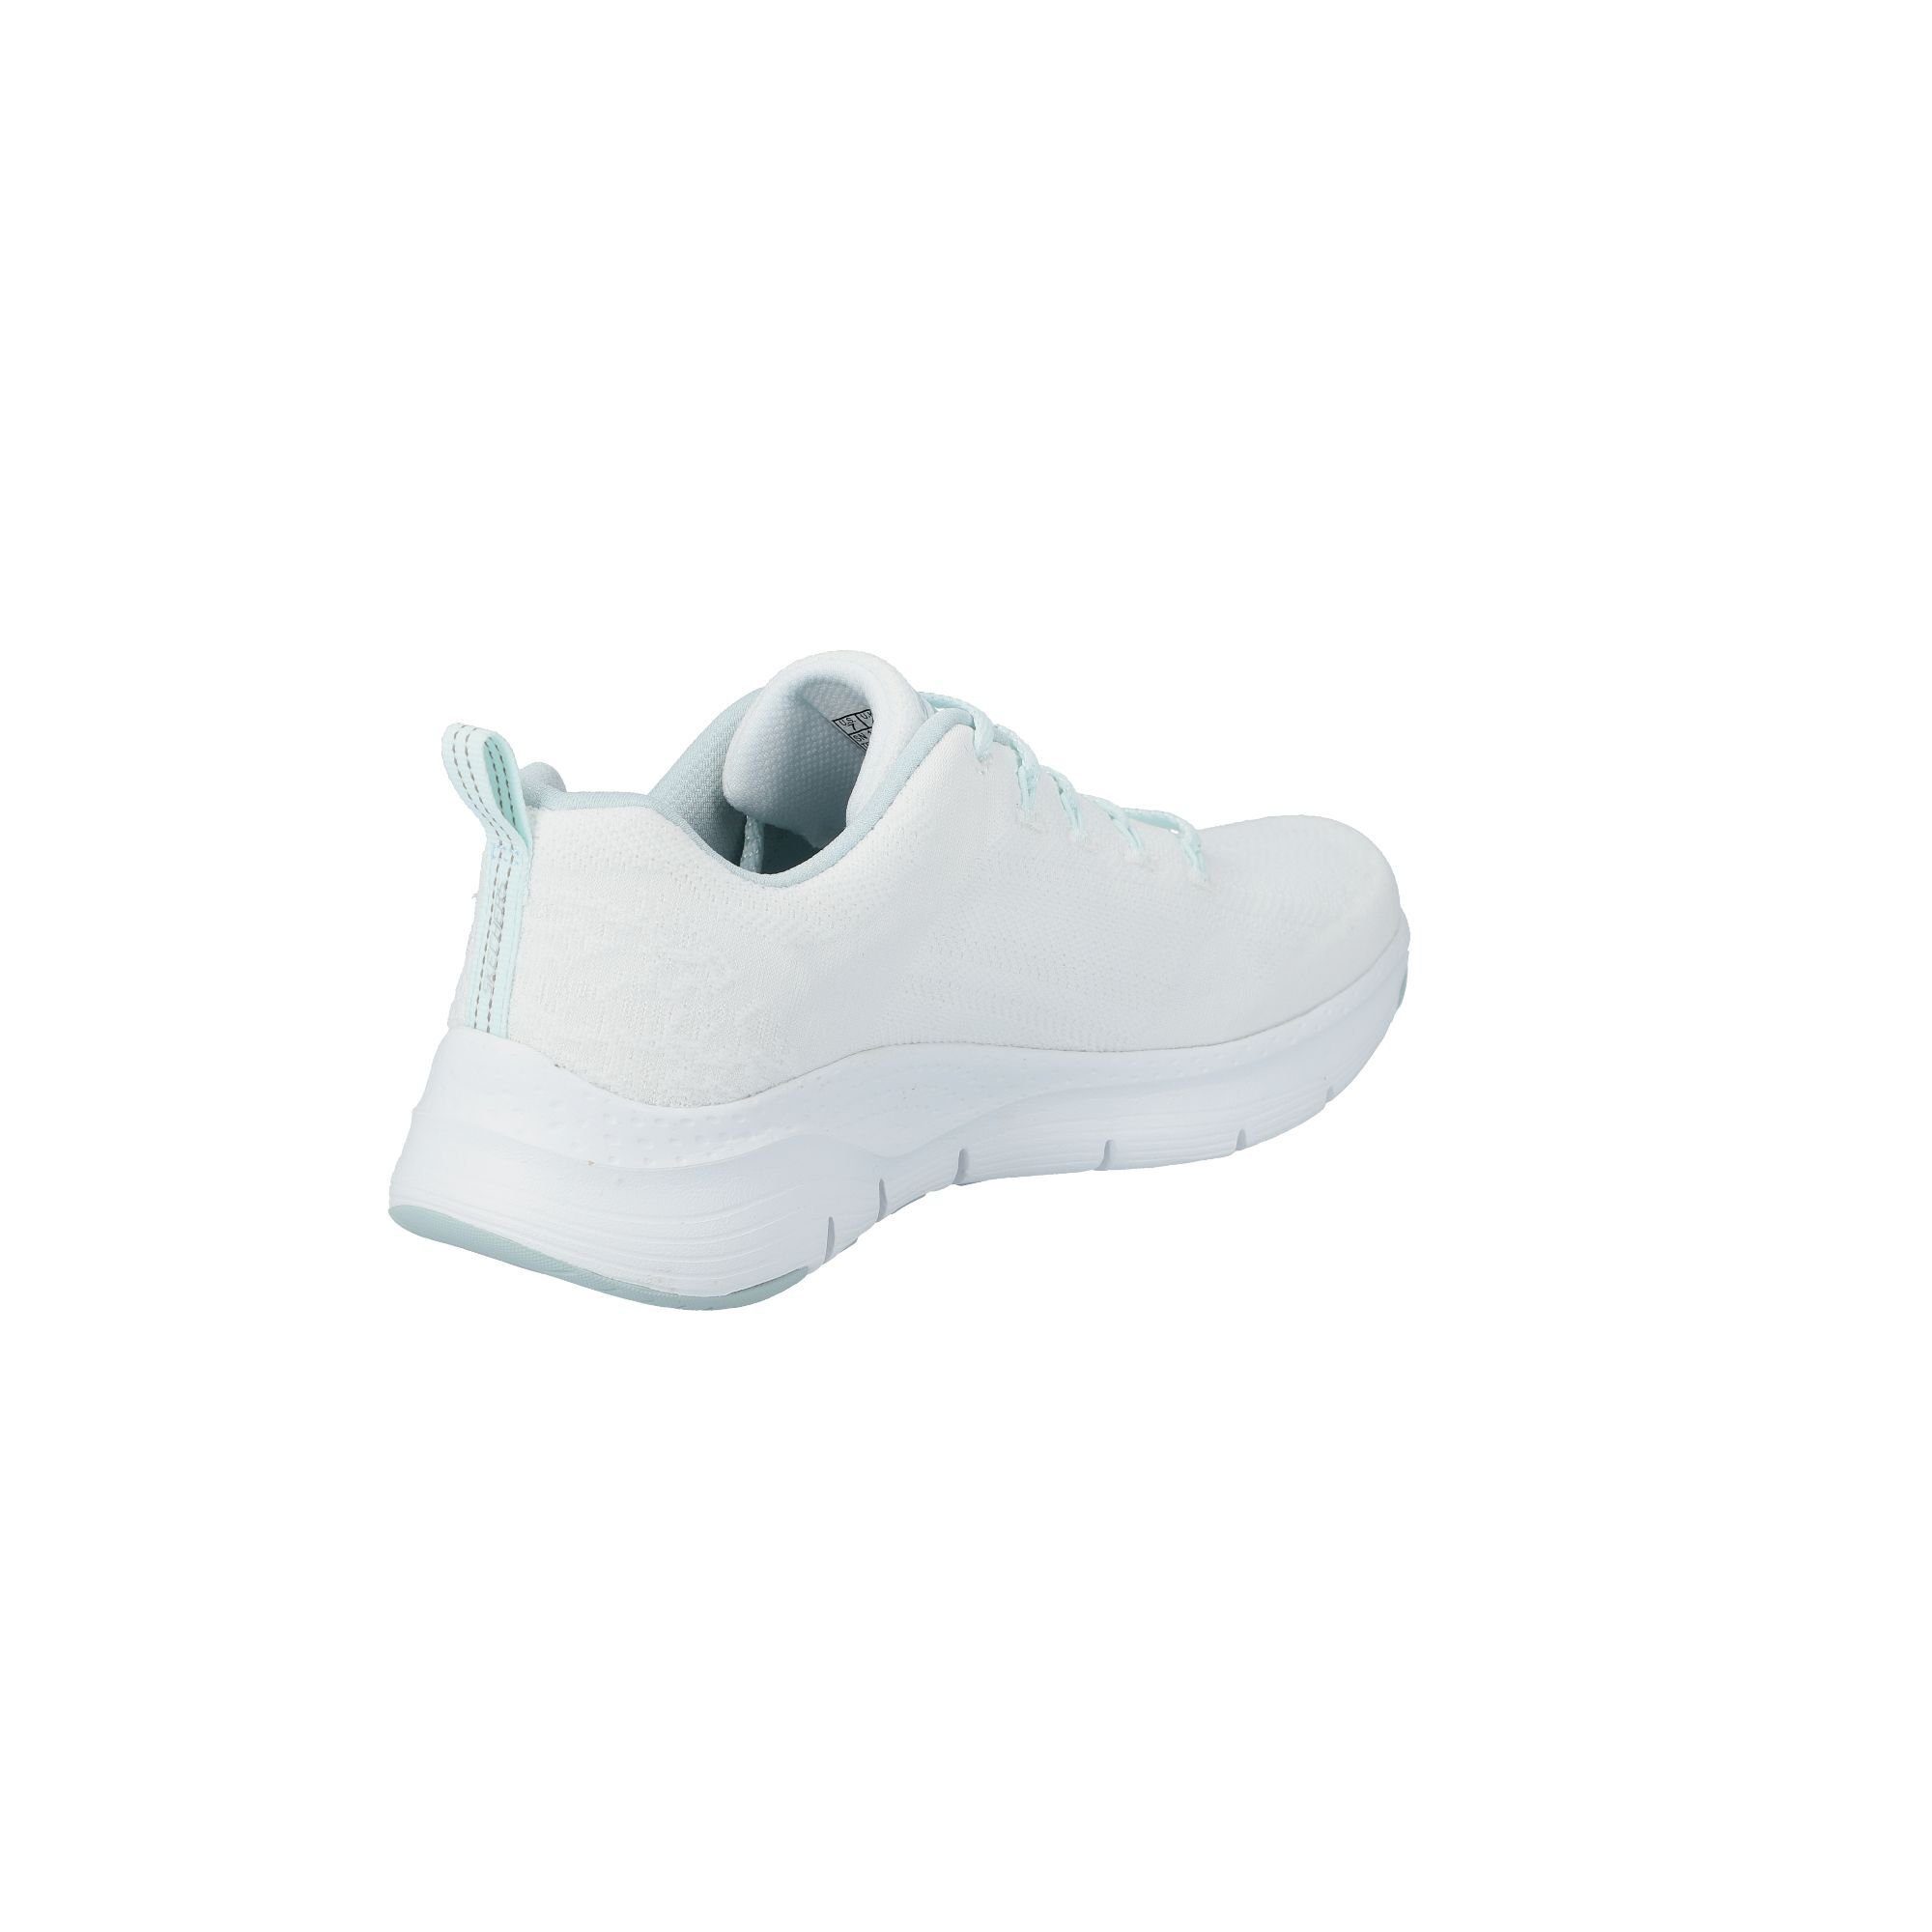 ARCH Sneaker WAVE COMFY white/mint (2-tlg) Skechers FIT -